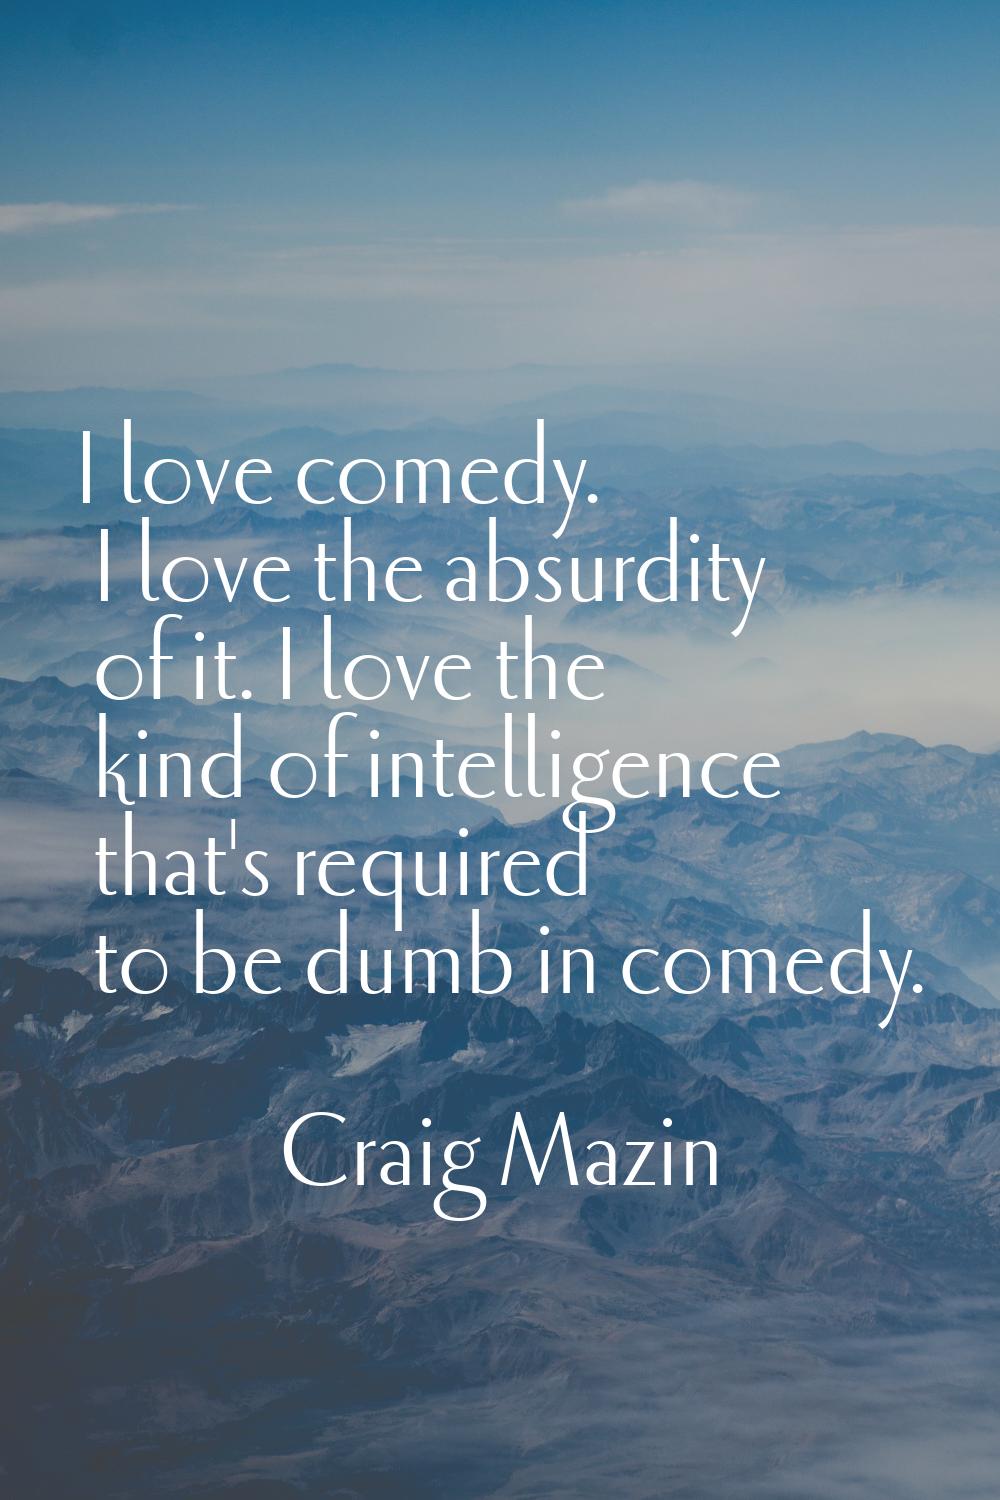 I love comedy. I love the absurdity of it. I love the kind of intelligence that's required to be du